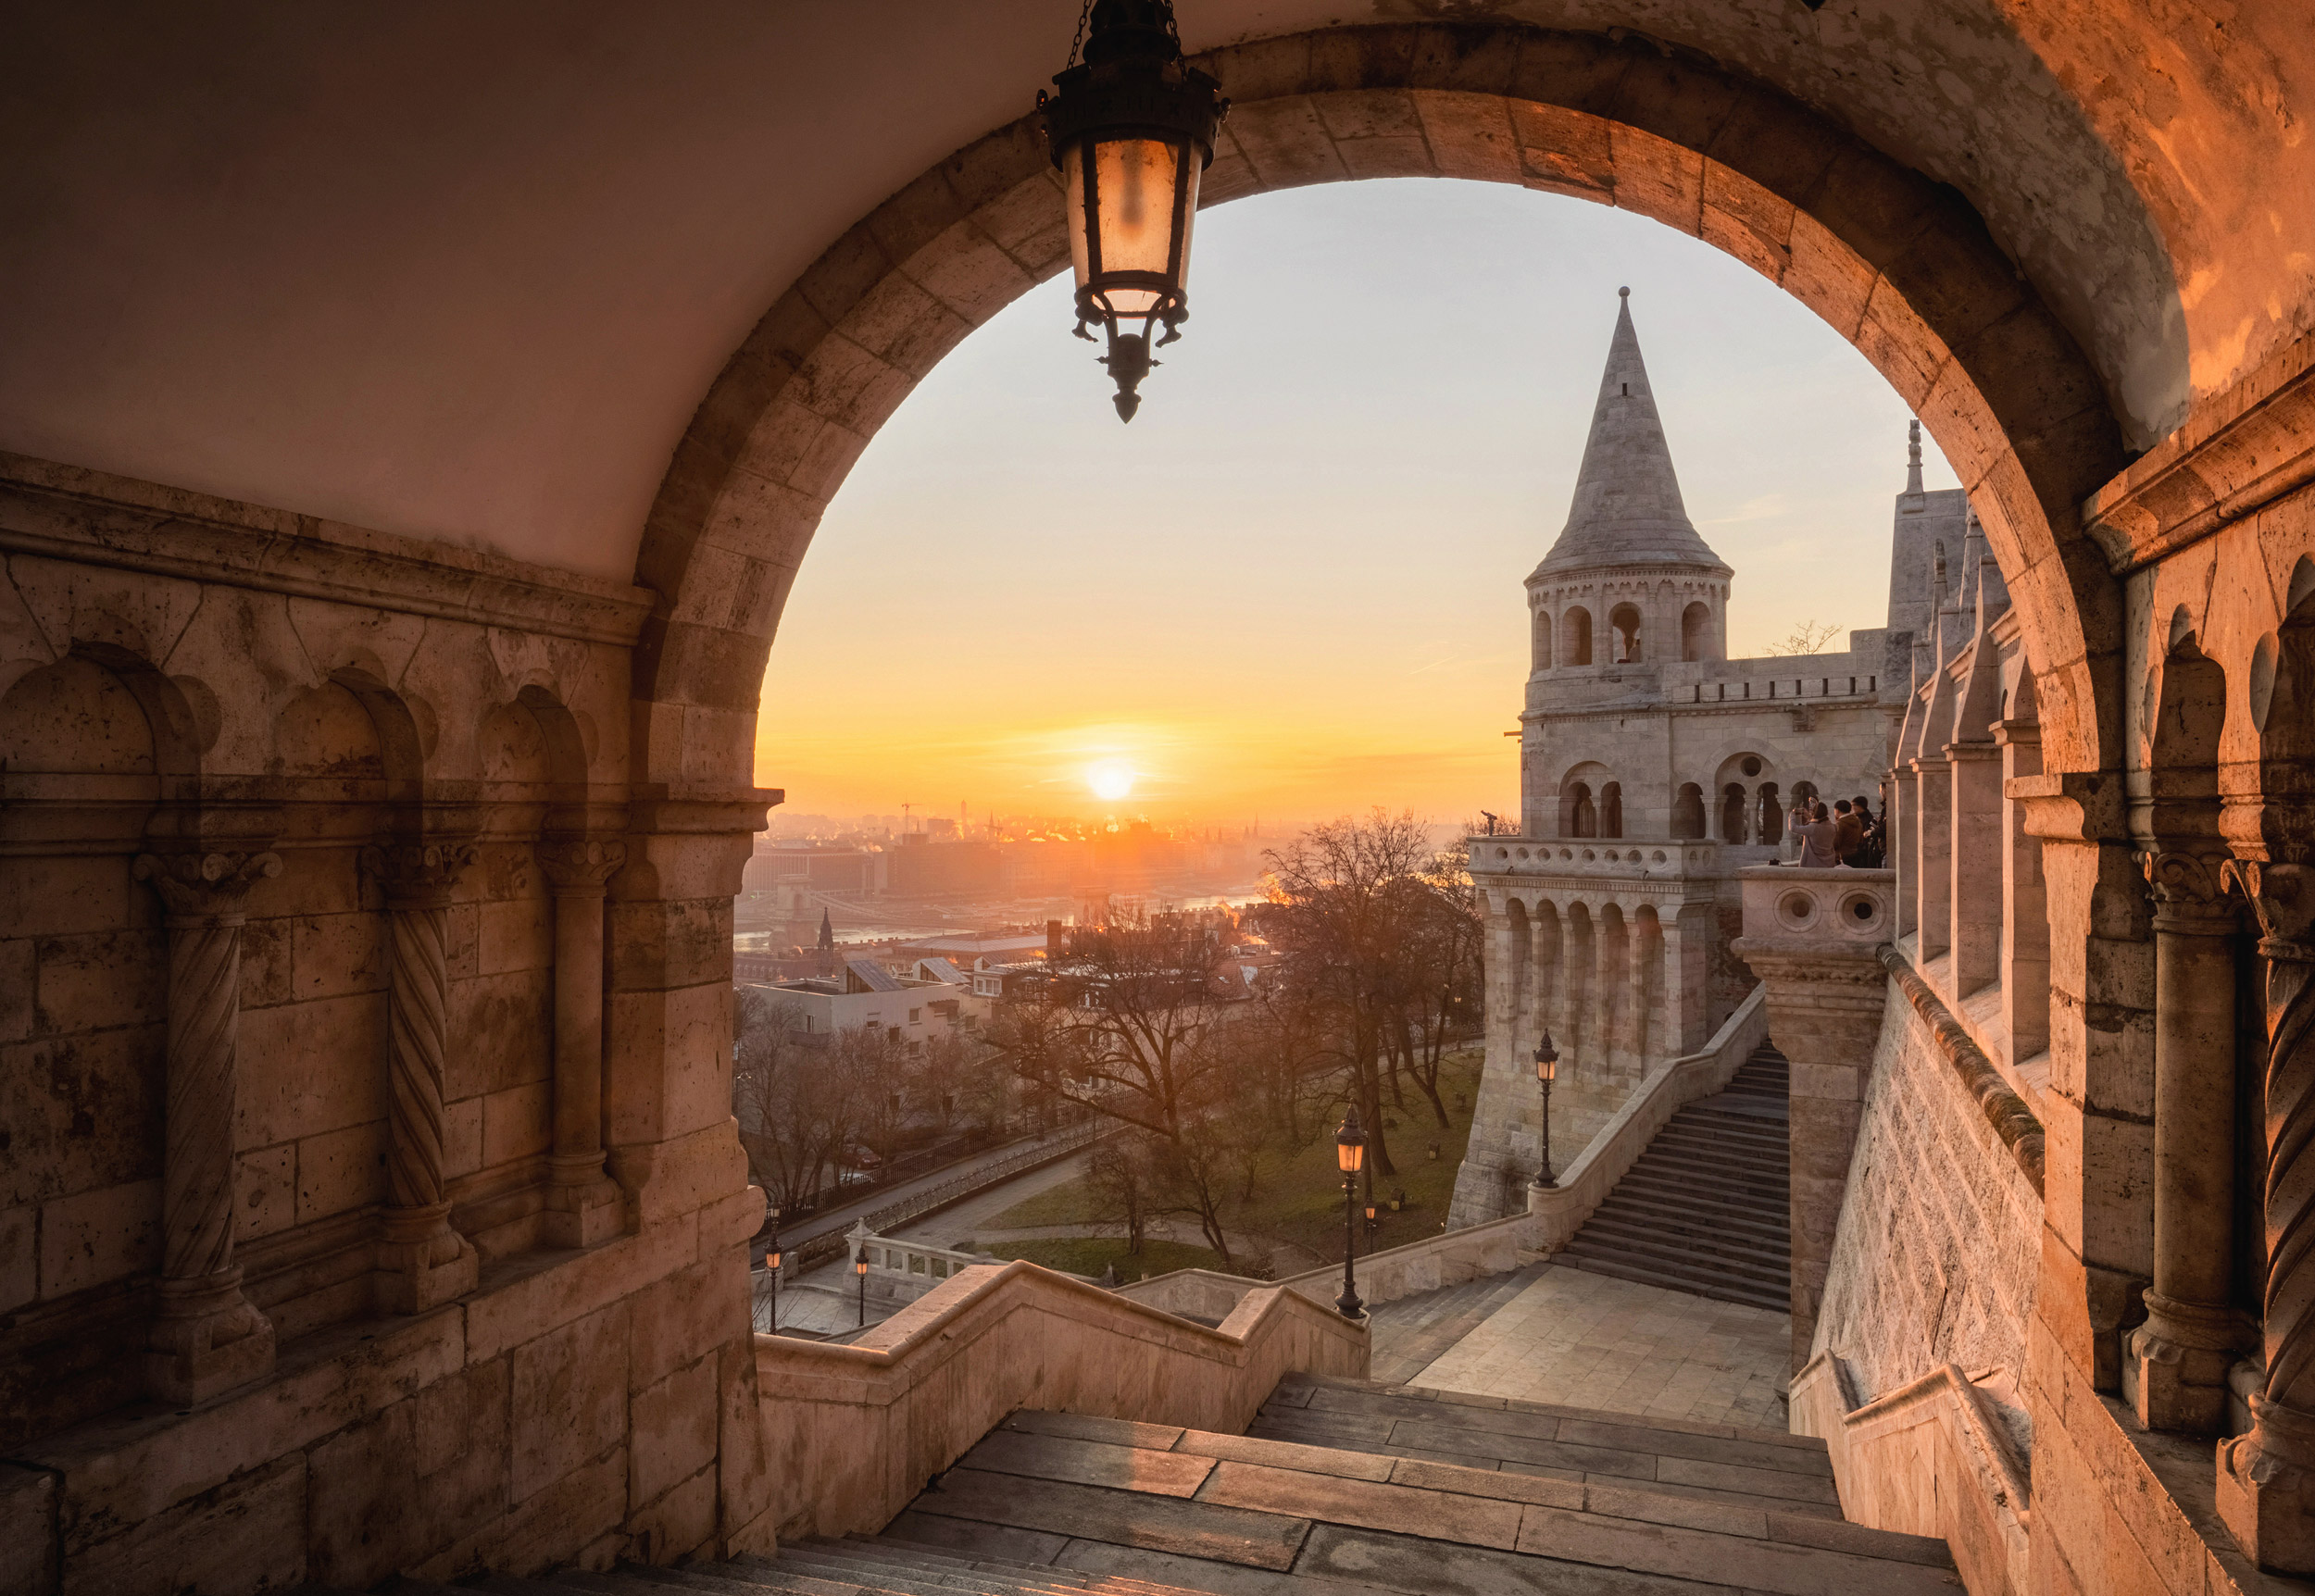 The north gate of the Fisherman’s Bastion at morning winter ligh